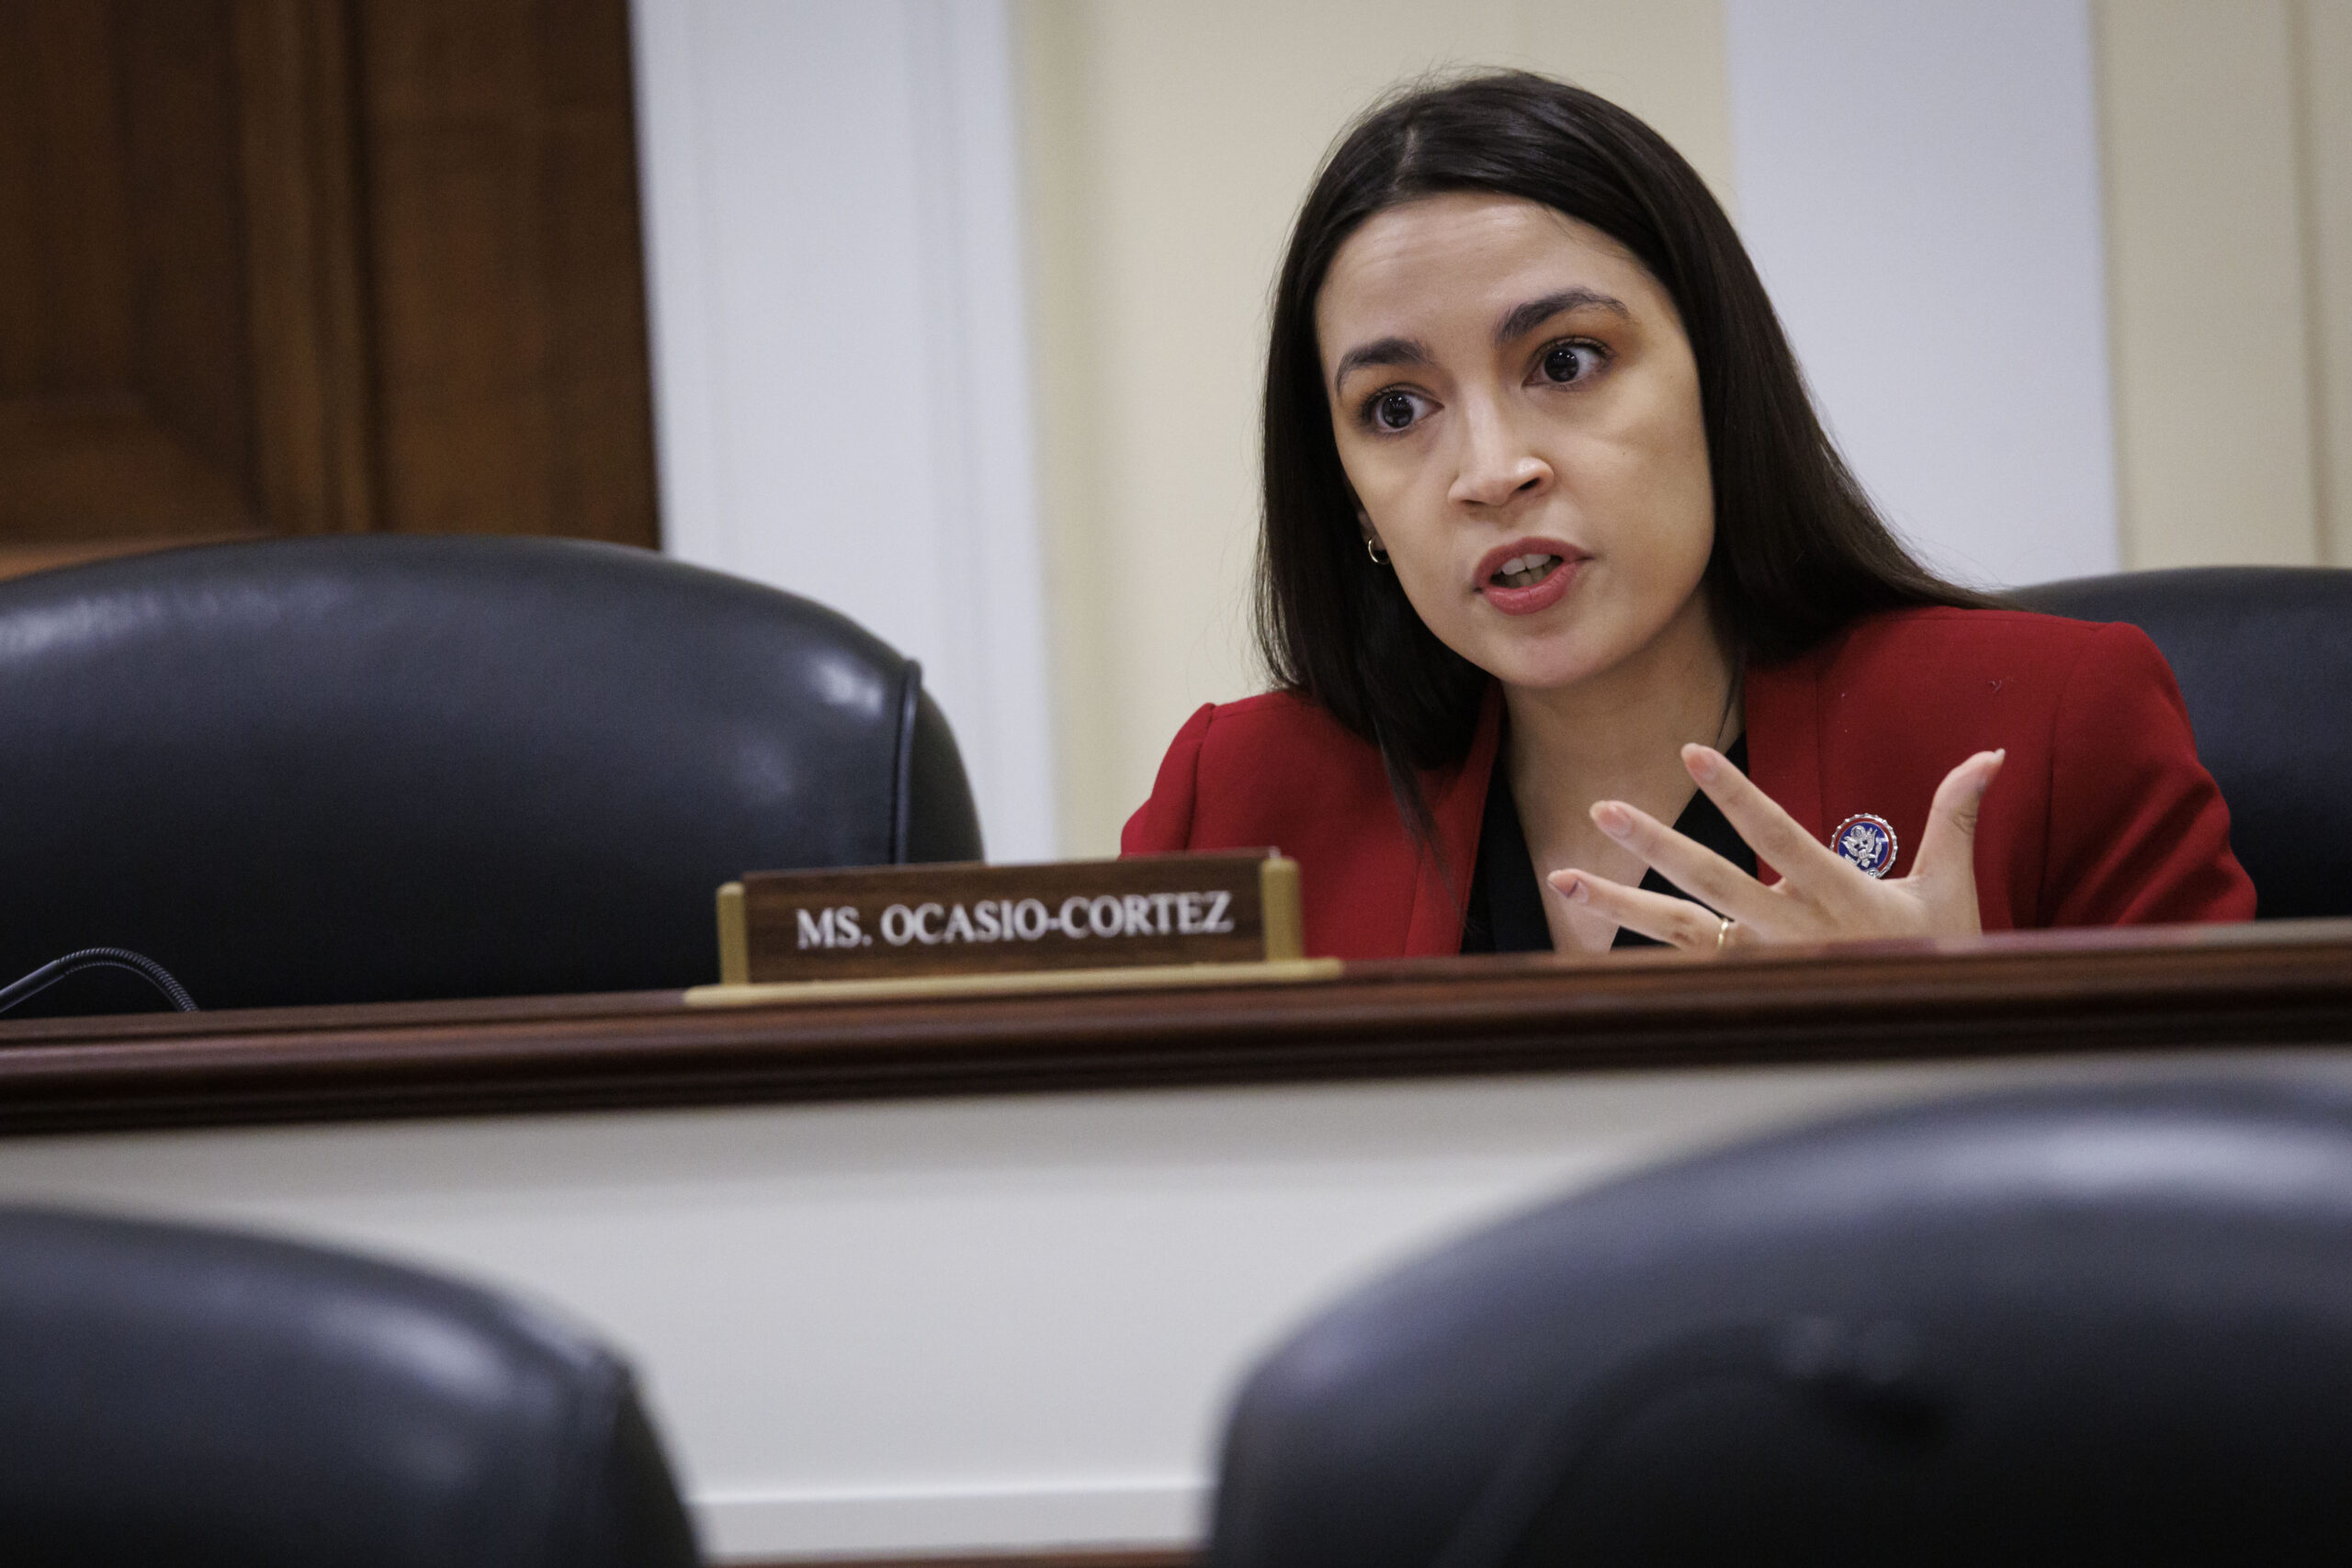 AOC Says NYC Mayor May Support Community Violence Prevention Programs Rather Than Increased Police Wages